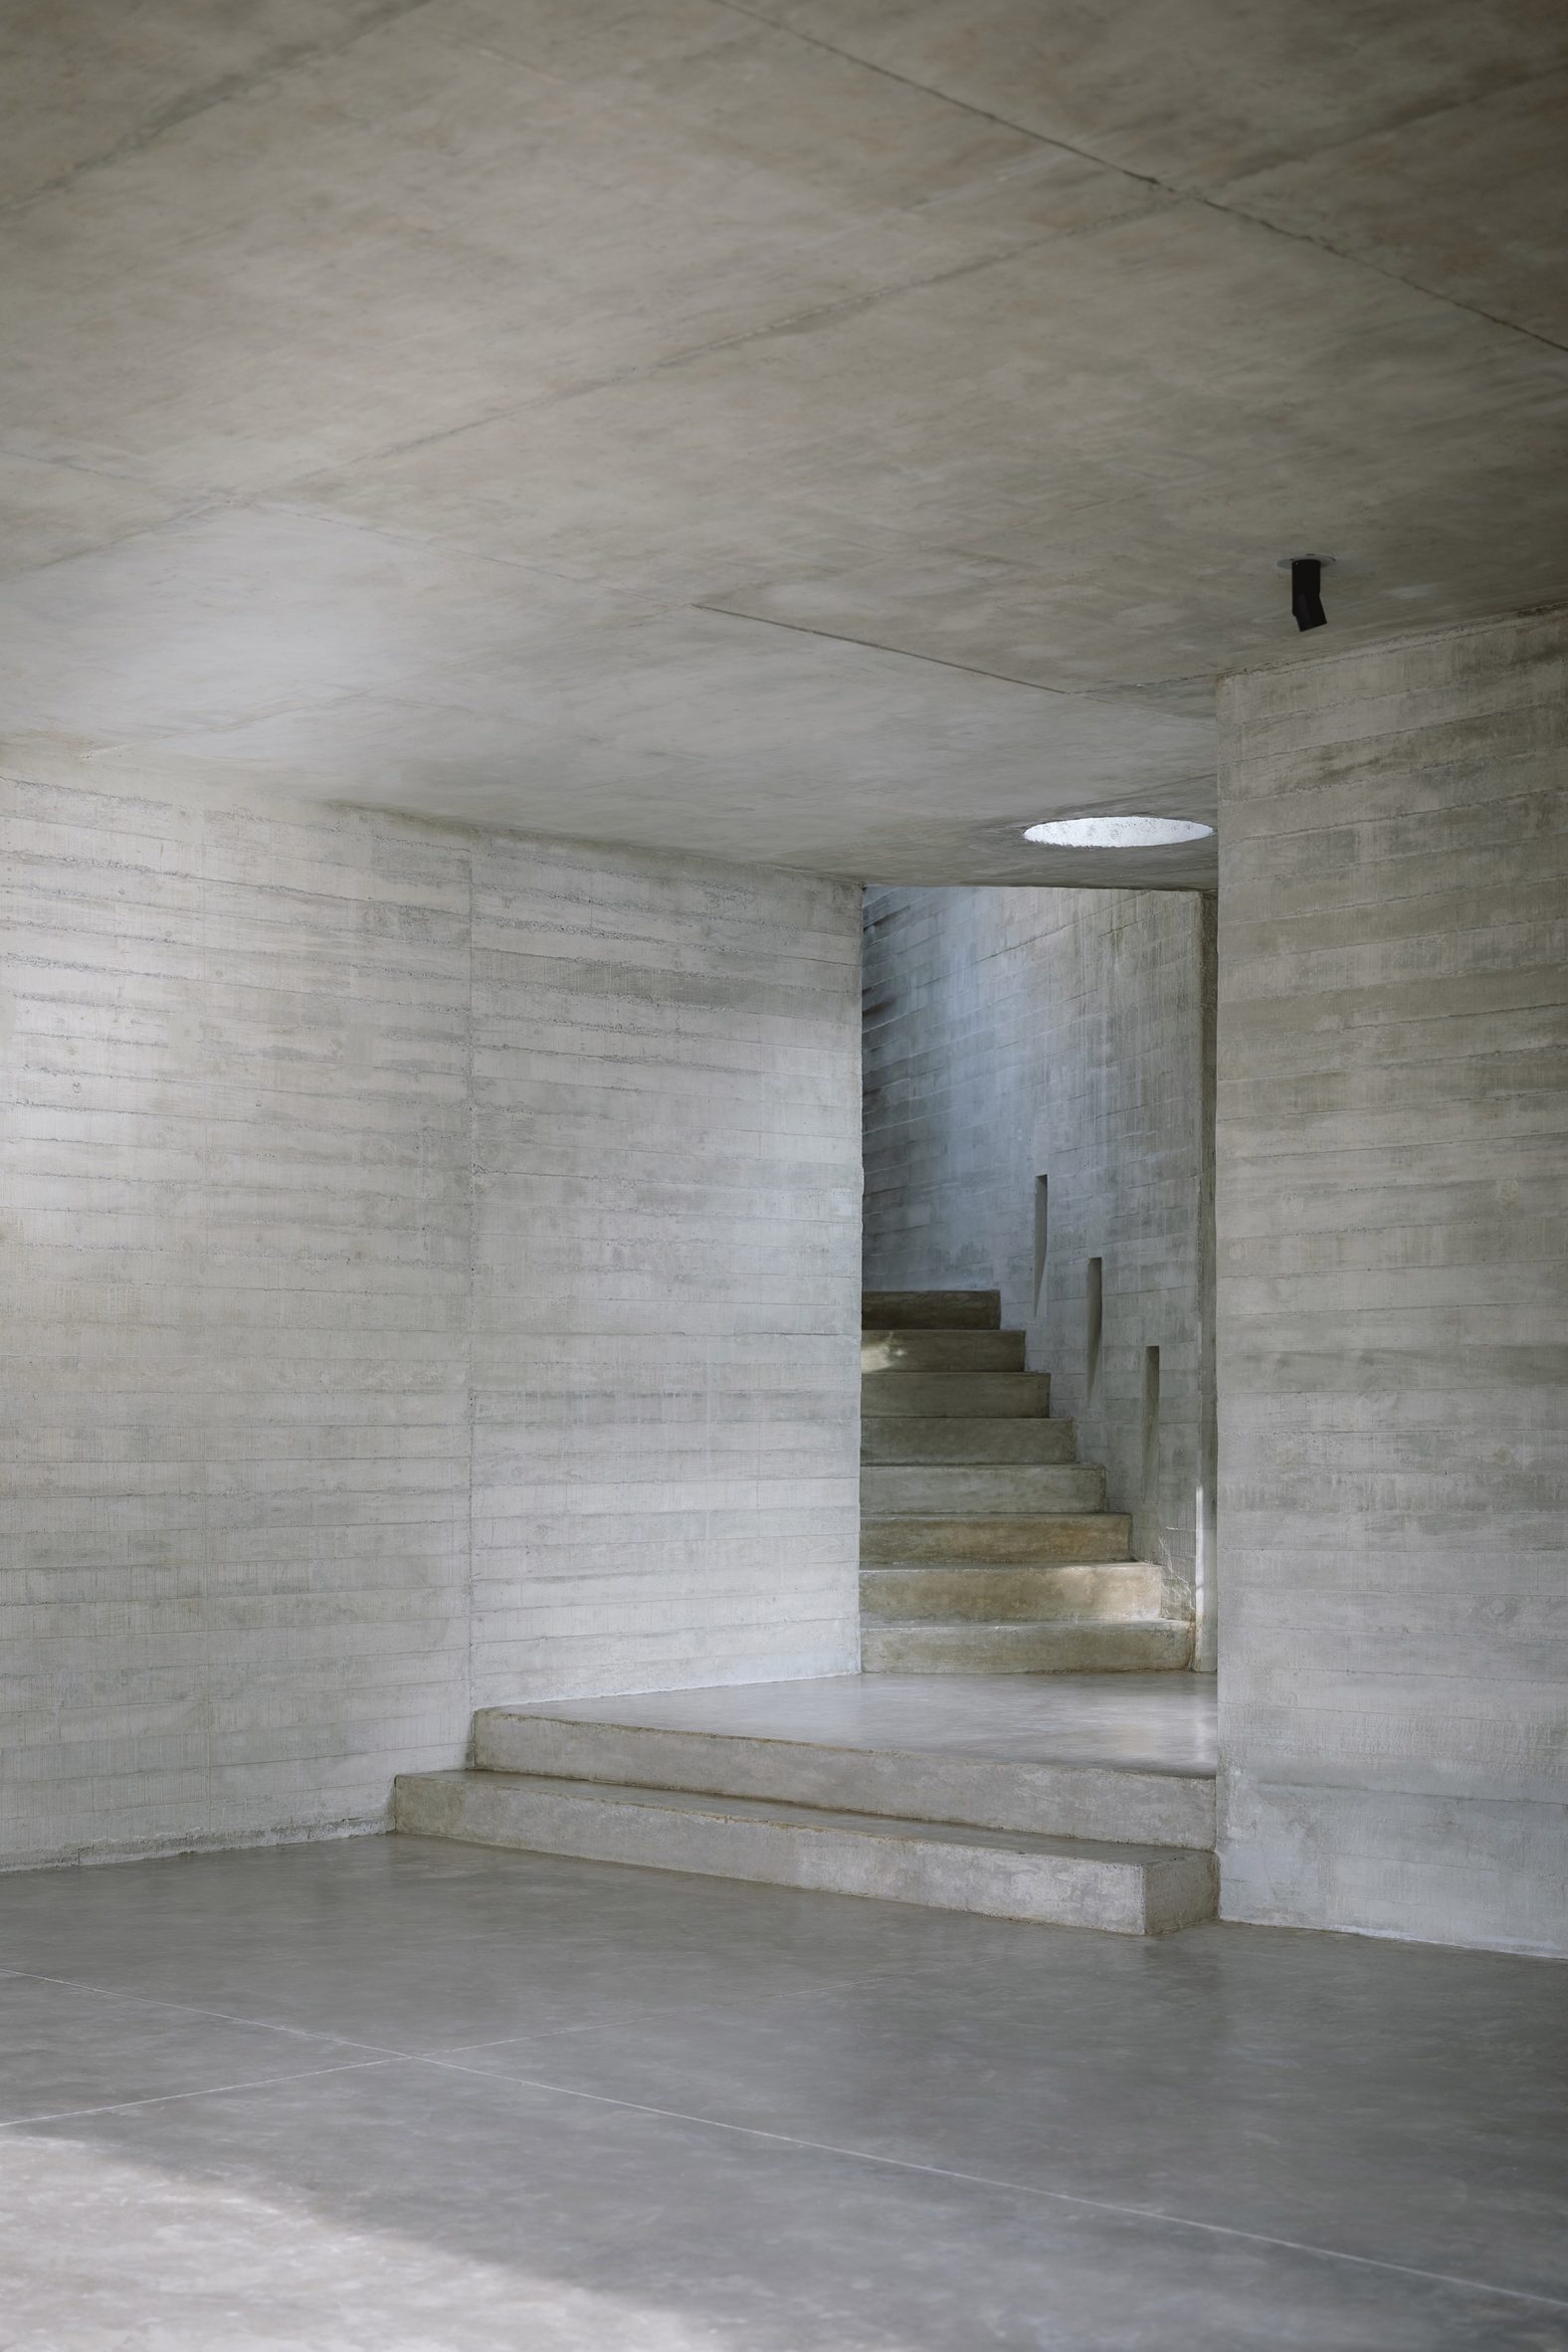 Concrete covers the walls floors and ceiling at Casa Amapa